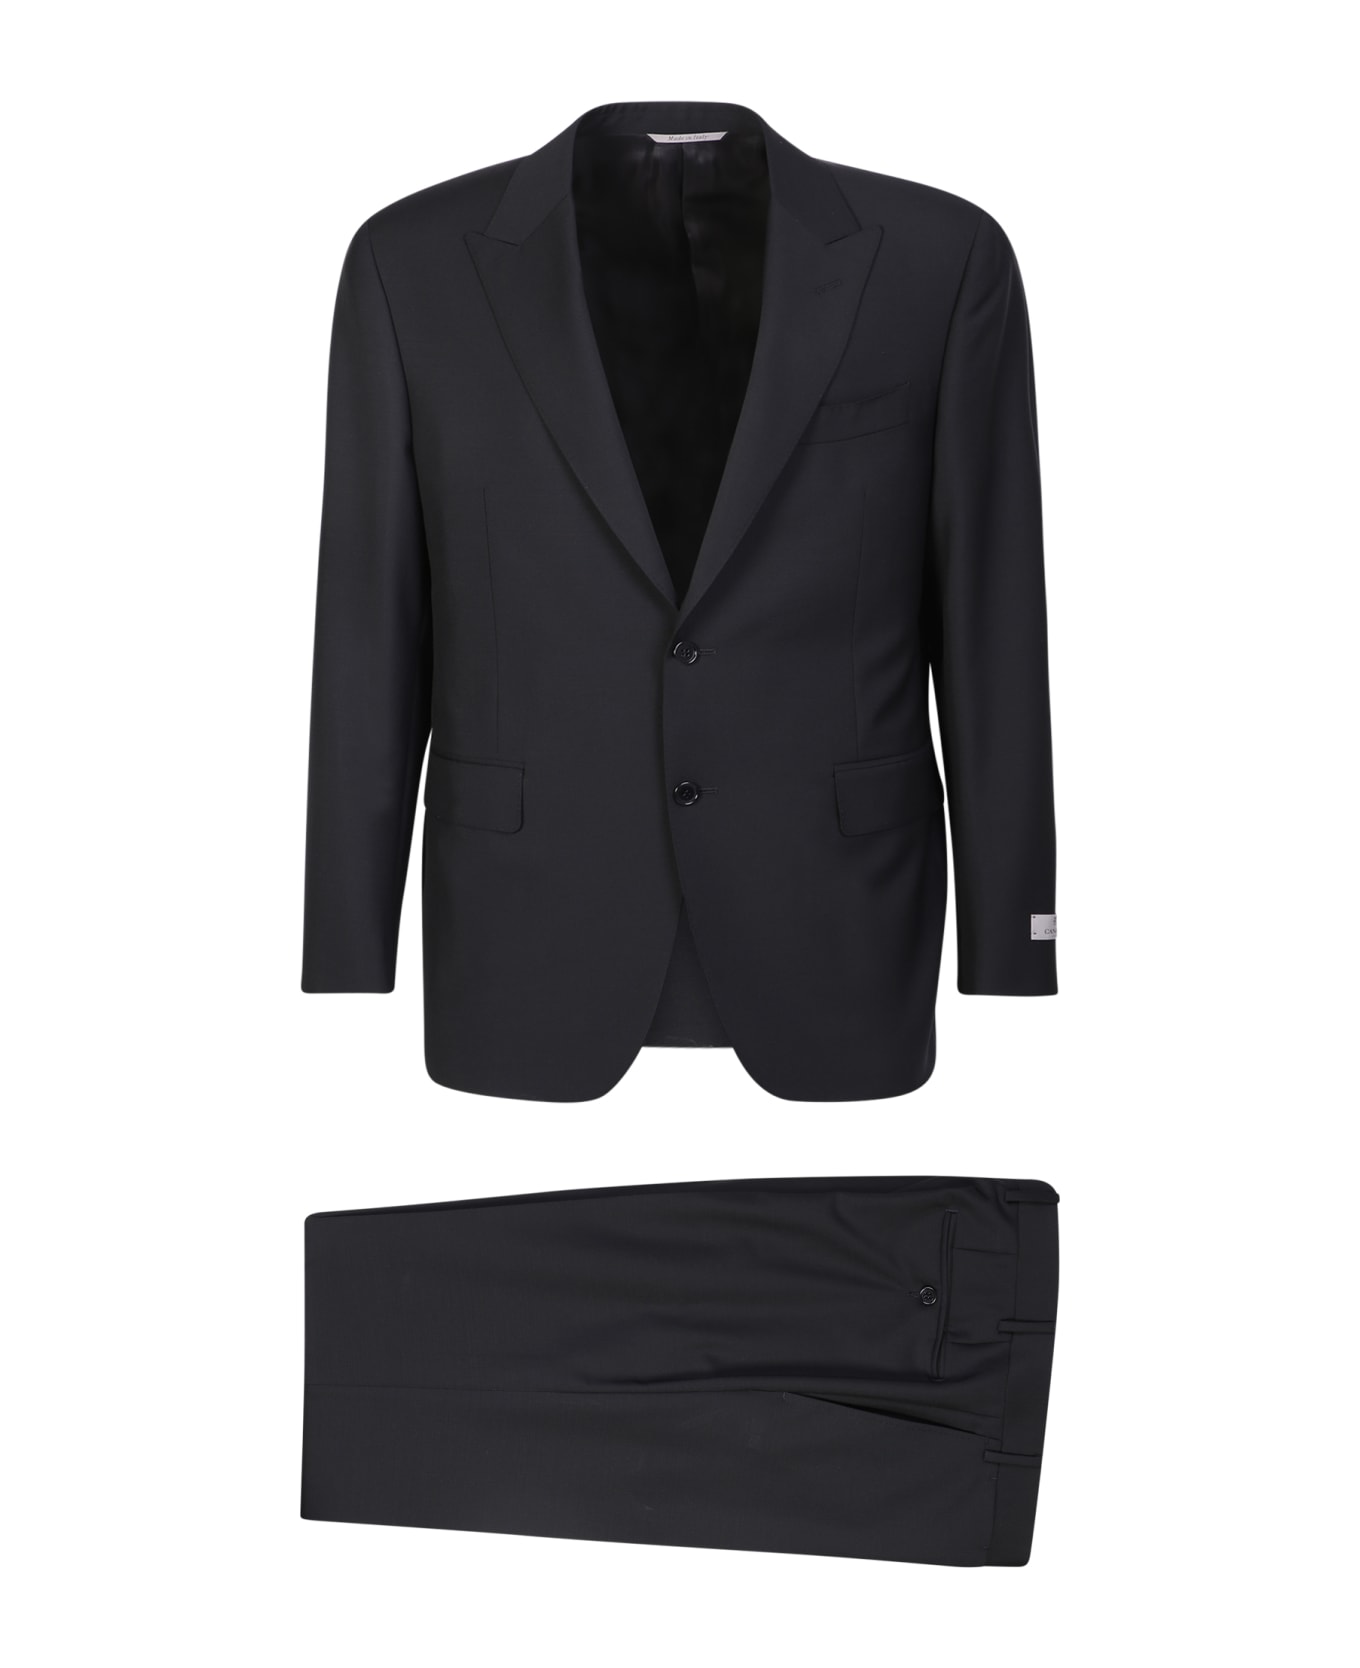 Canali Black Single-breasted Suit - Black スーツ